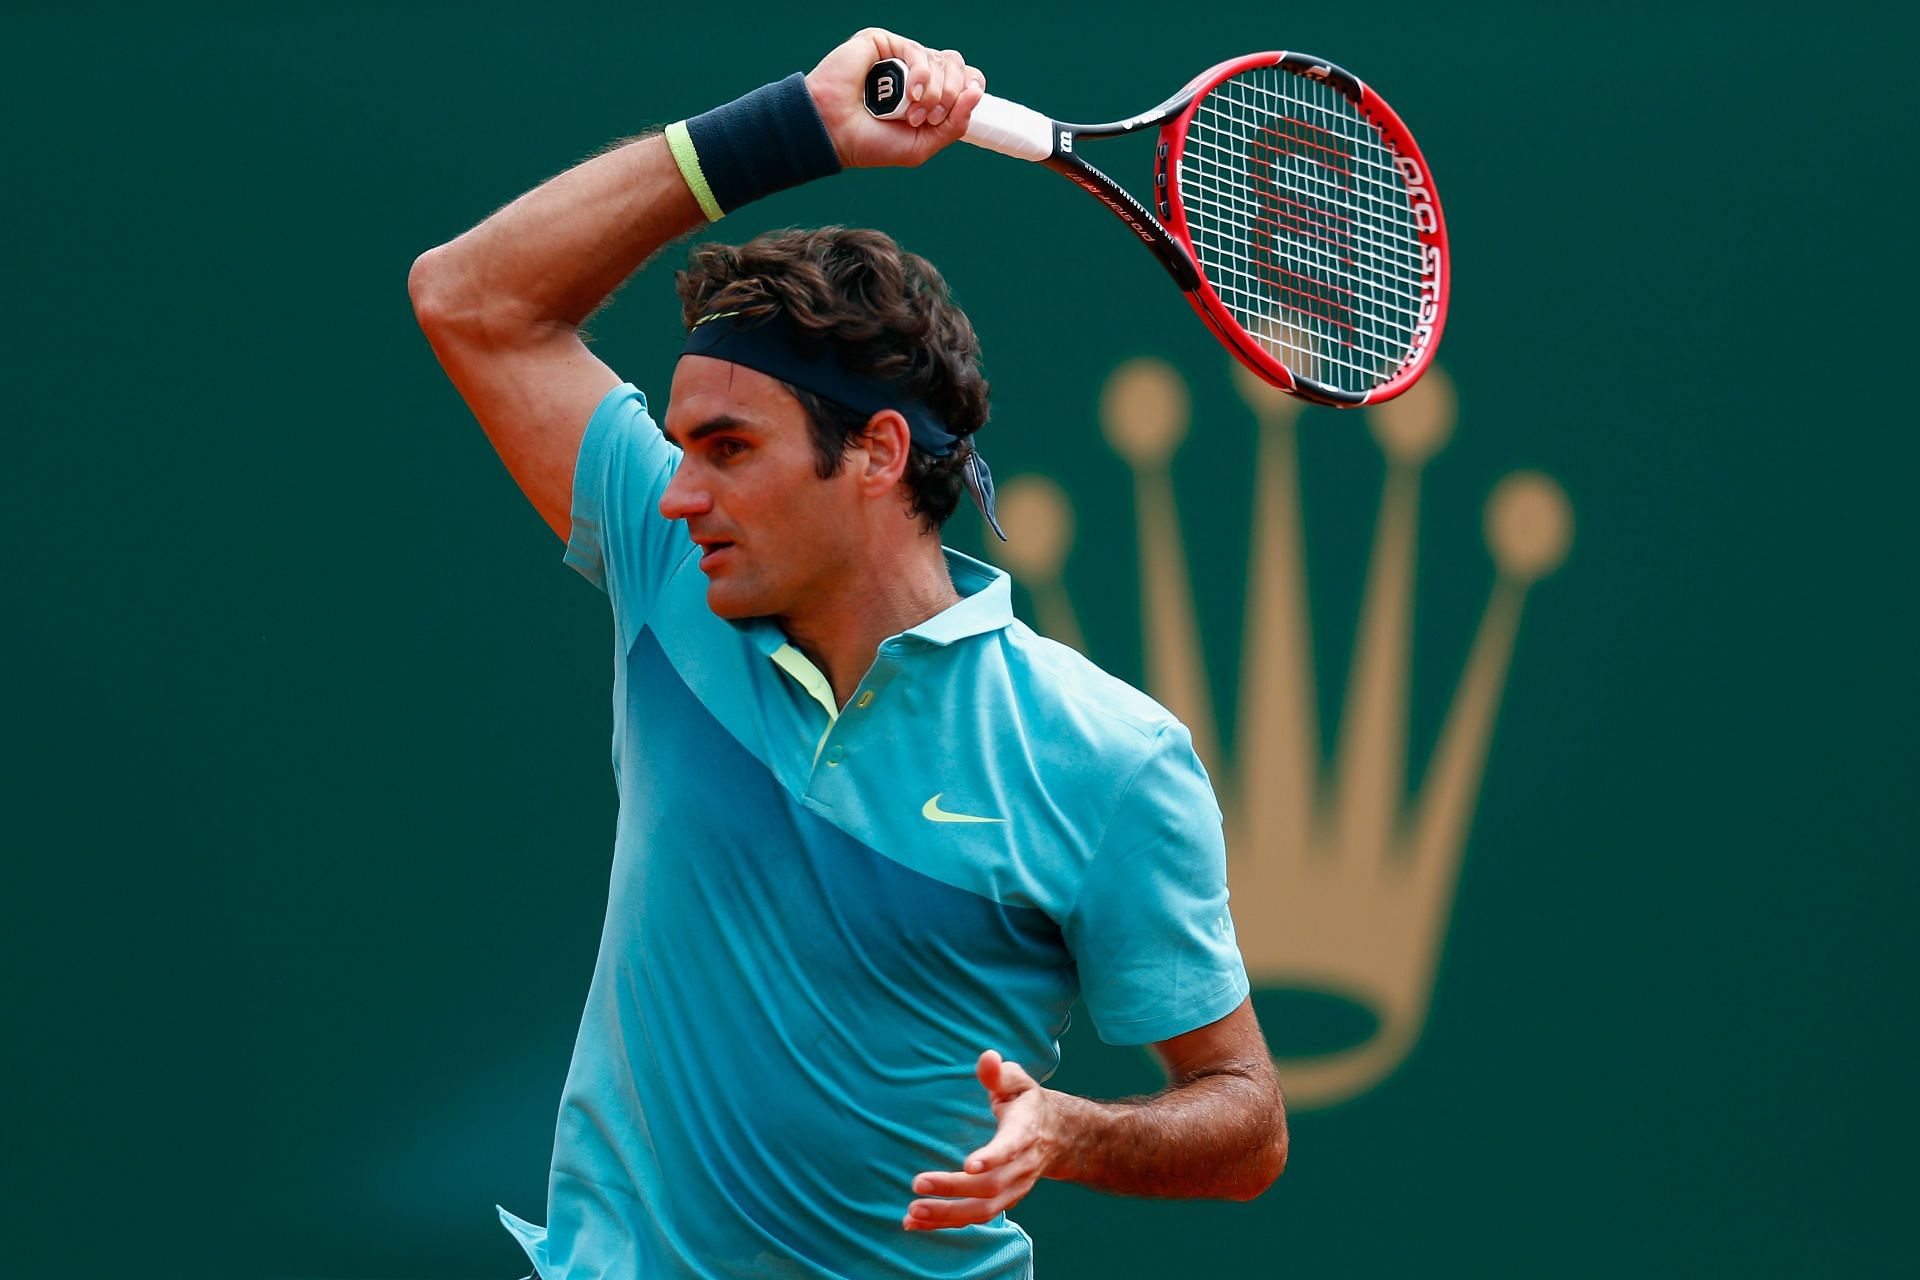 Roger Federer has been denied thrice in the final in Monte Carlo by Rafael Nadal